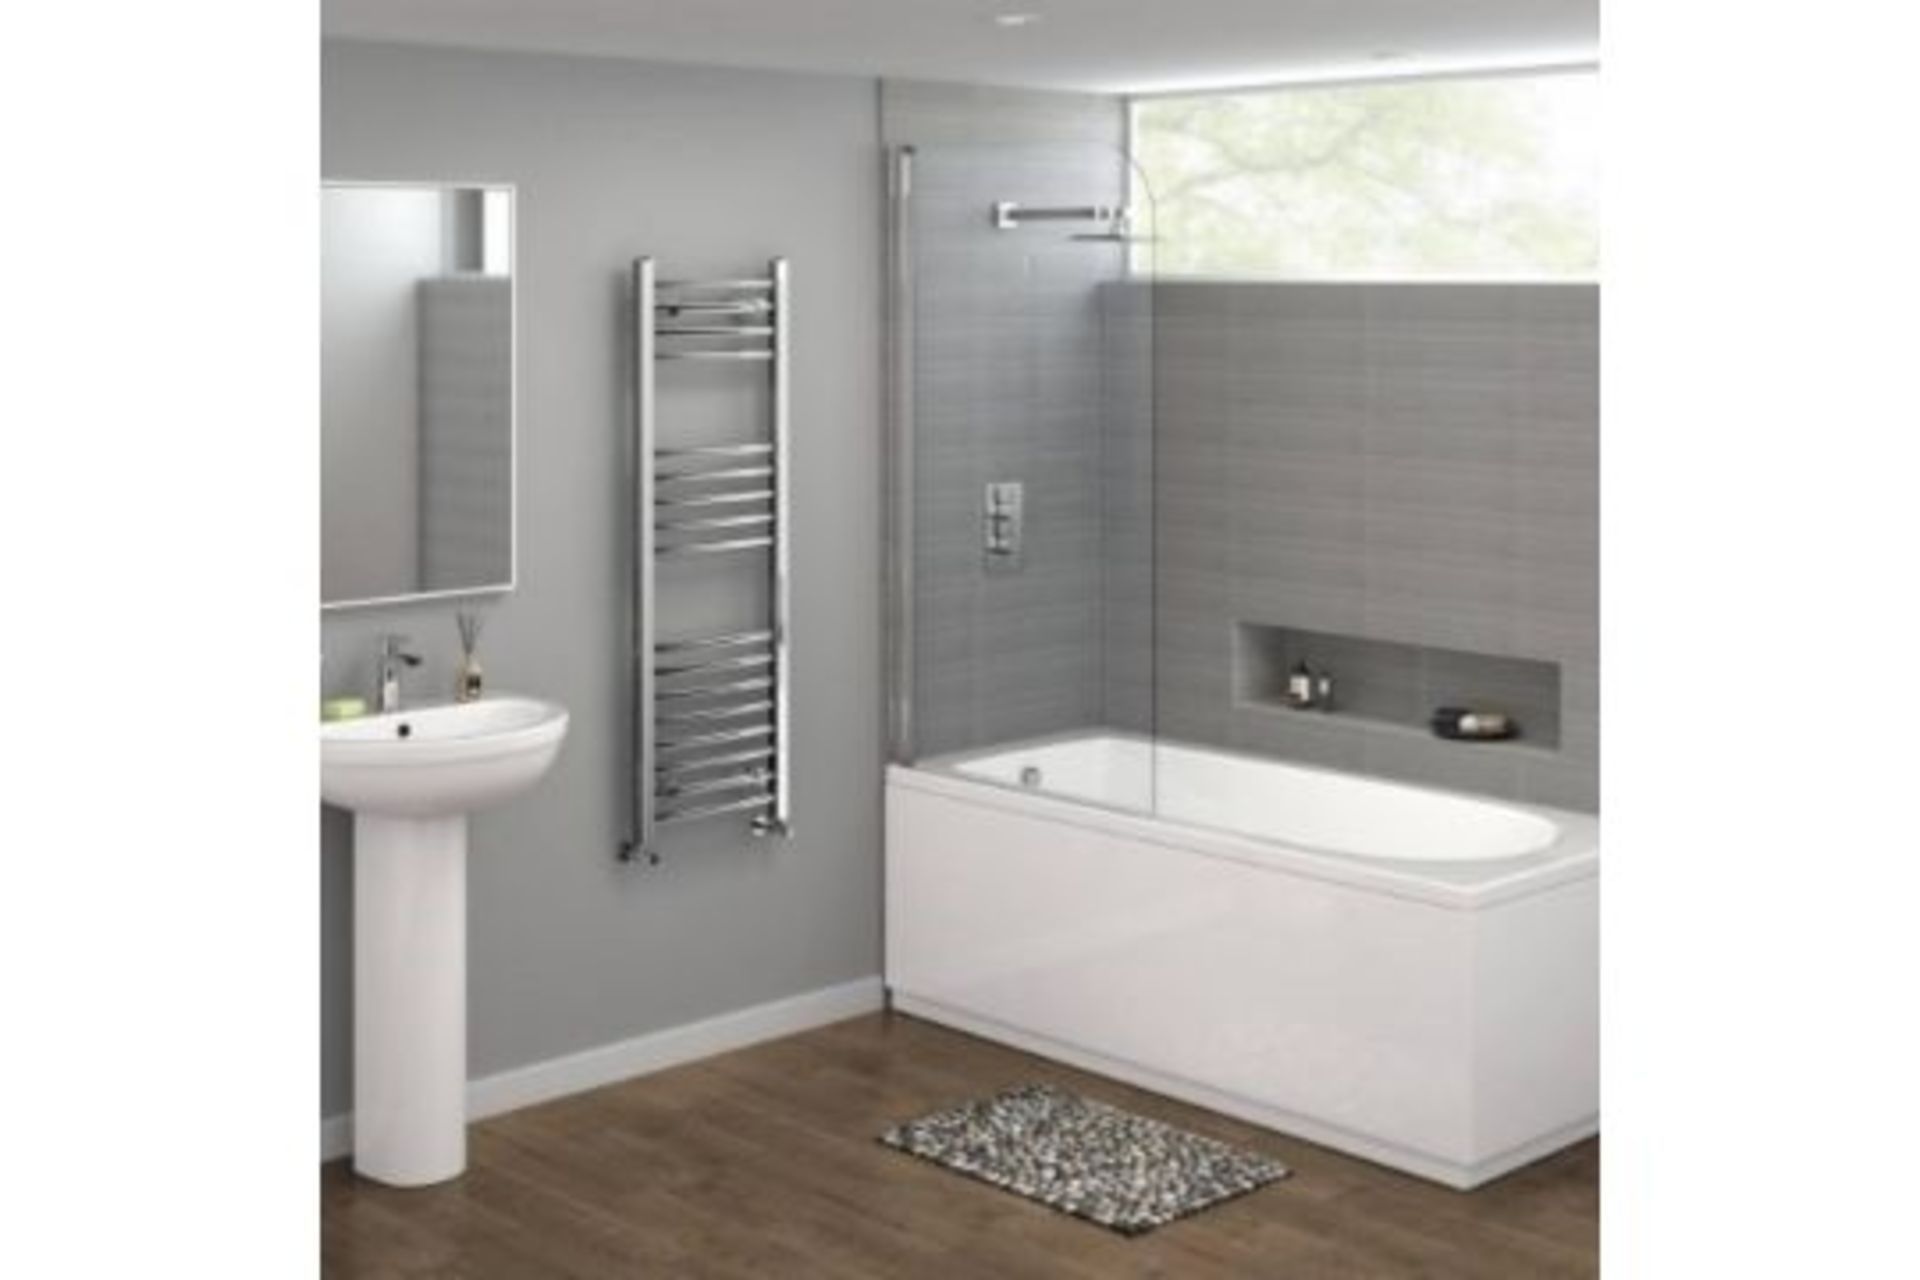 NEW & BOXED 1200x400mm - 20mm Tubes - Chrome Curved Rail Ladder Towel Radiator. NC1200400.... - Image 2 of 2